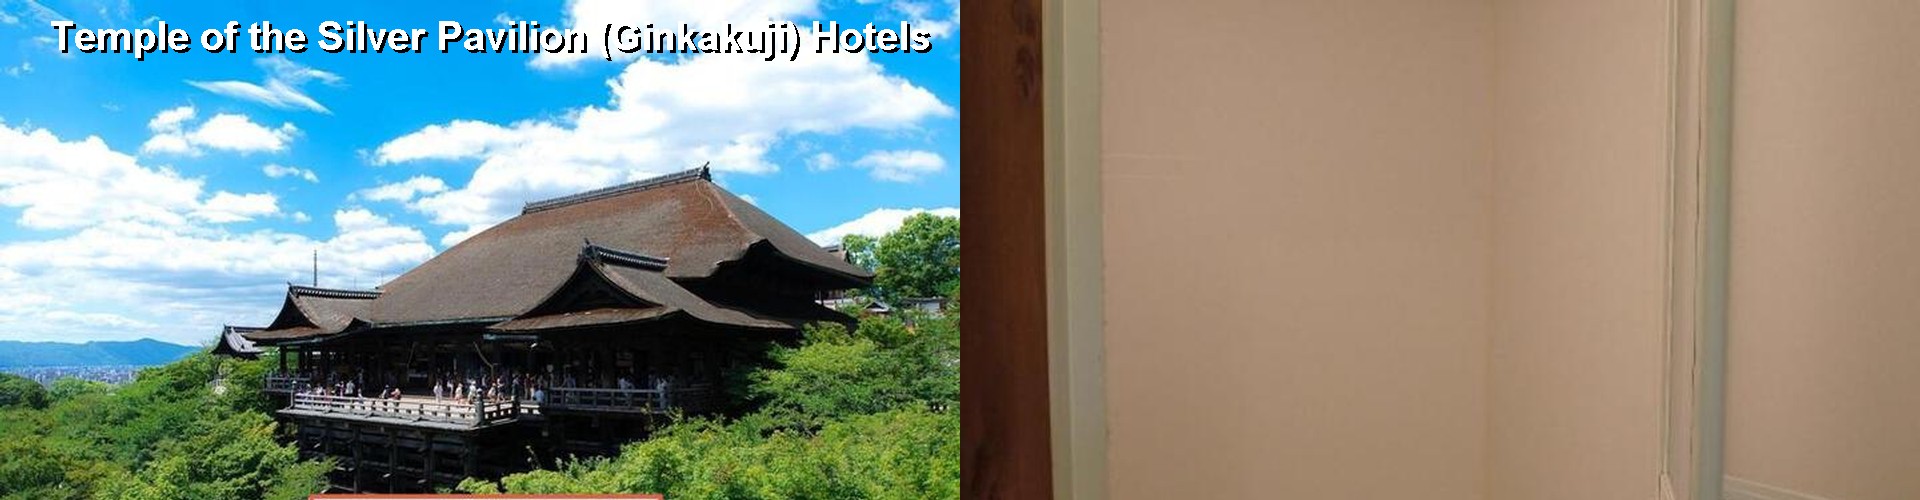 4 Best Hotels near Temple of the Silver Pavilion (Ginkakuji)